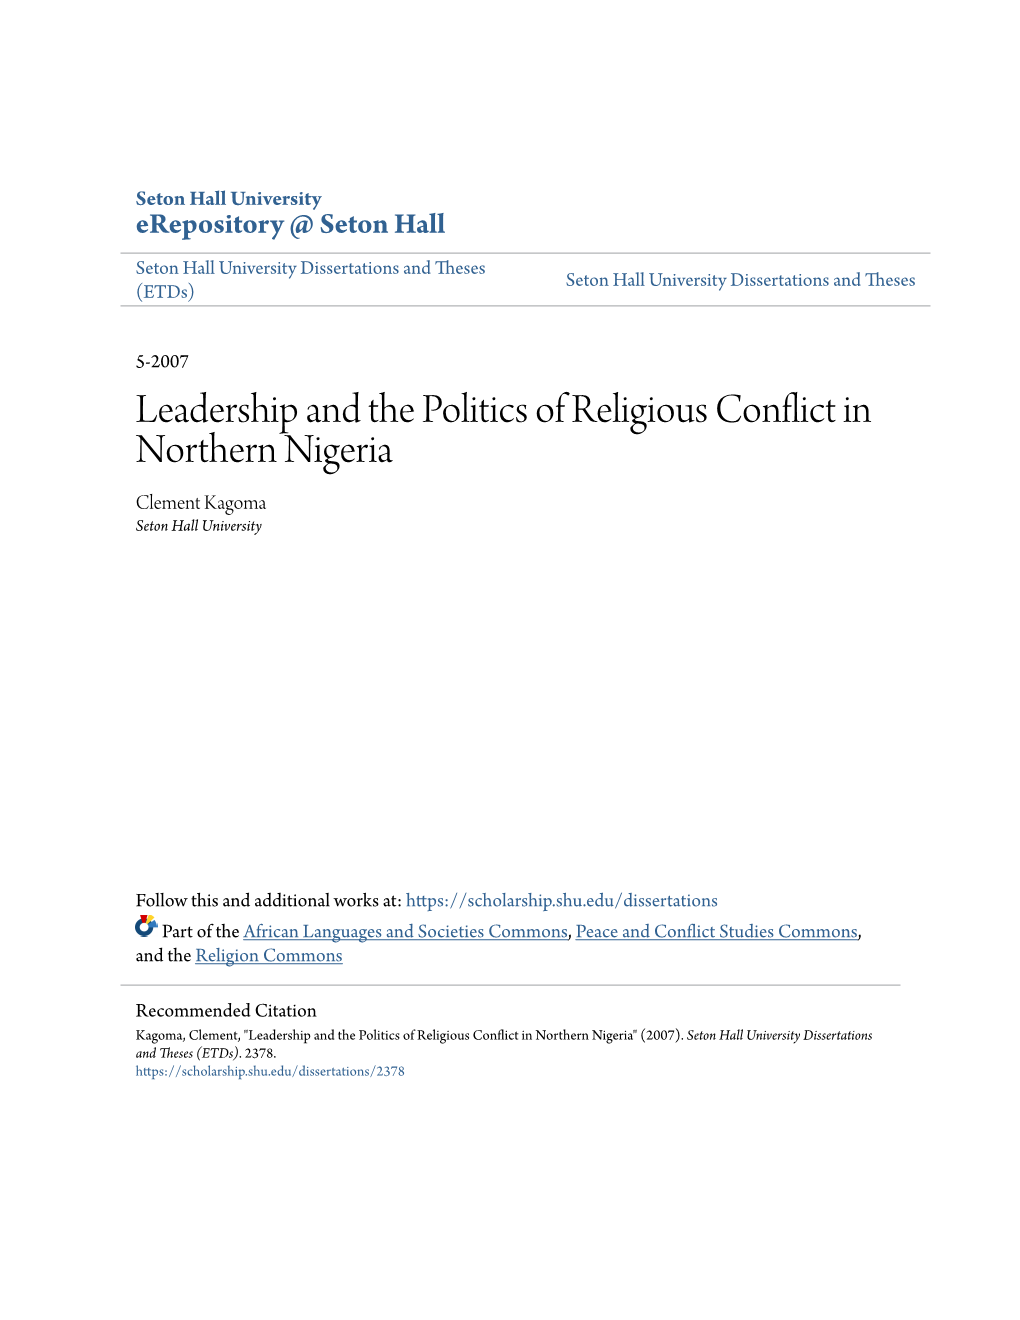 Leadership and the Politics of Religious Conflict in Northern Nigeria Clement Kagoma Seton Hall University